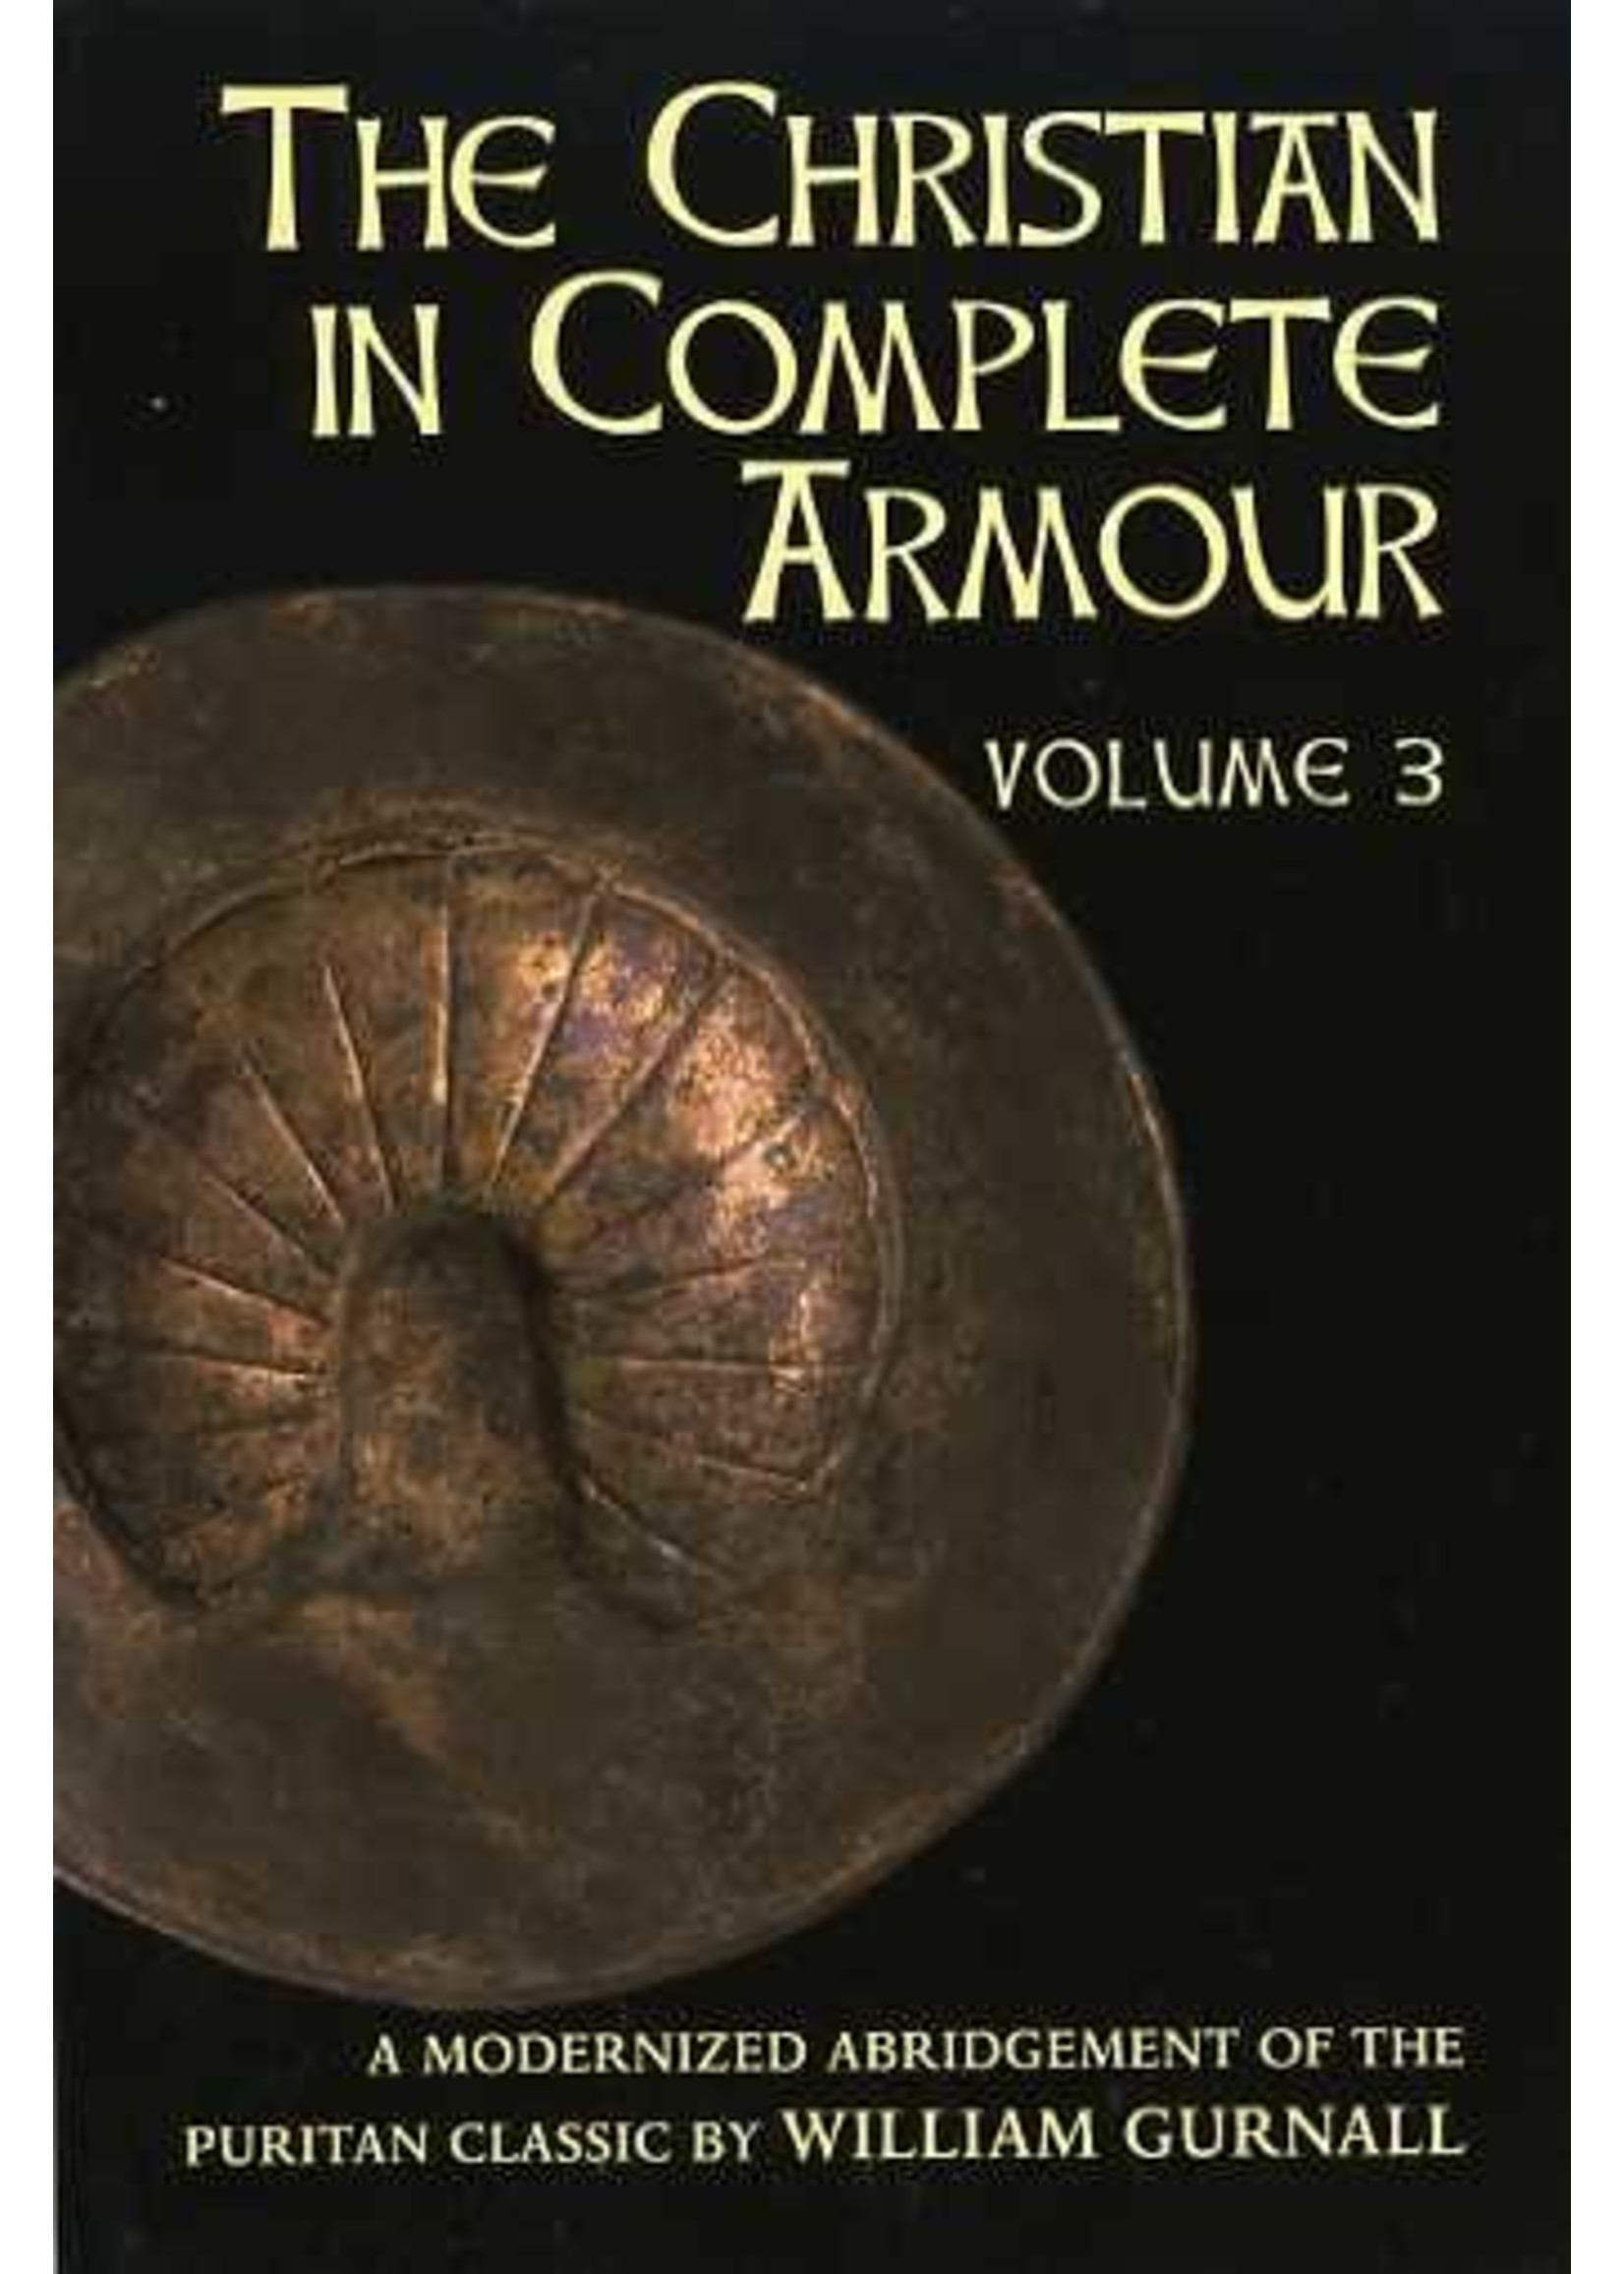 Banner of Truth The Christian in Complete Armour Vol. 3 - William Gurnall